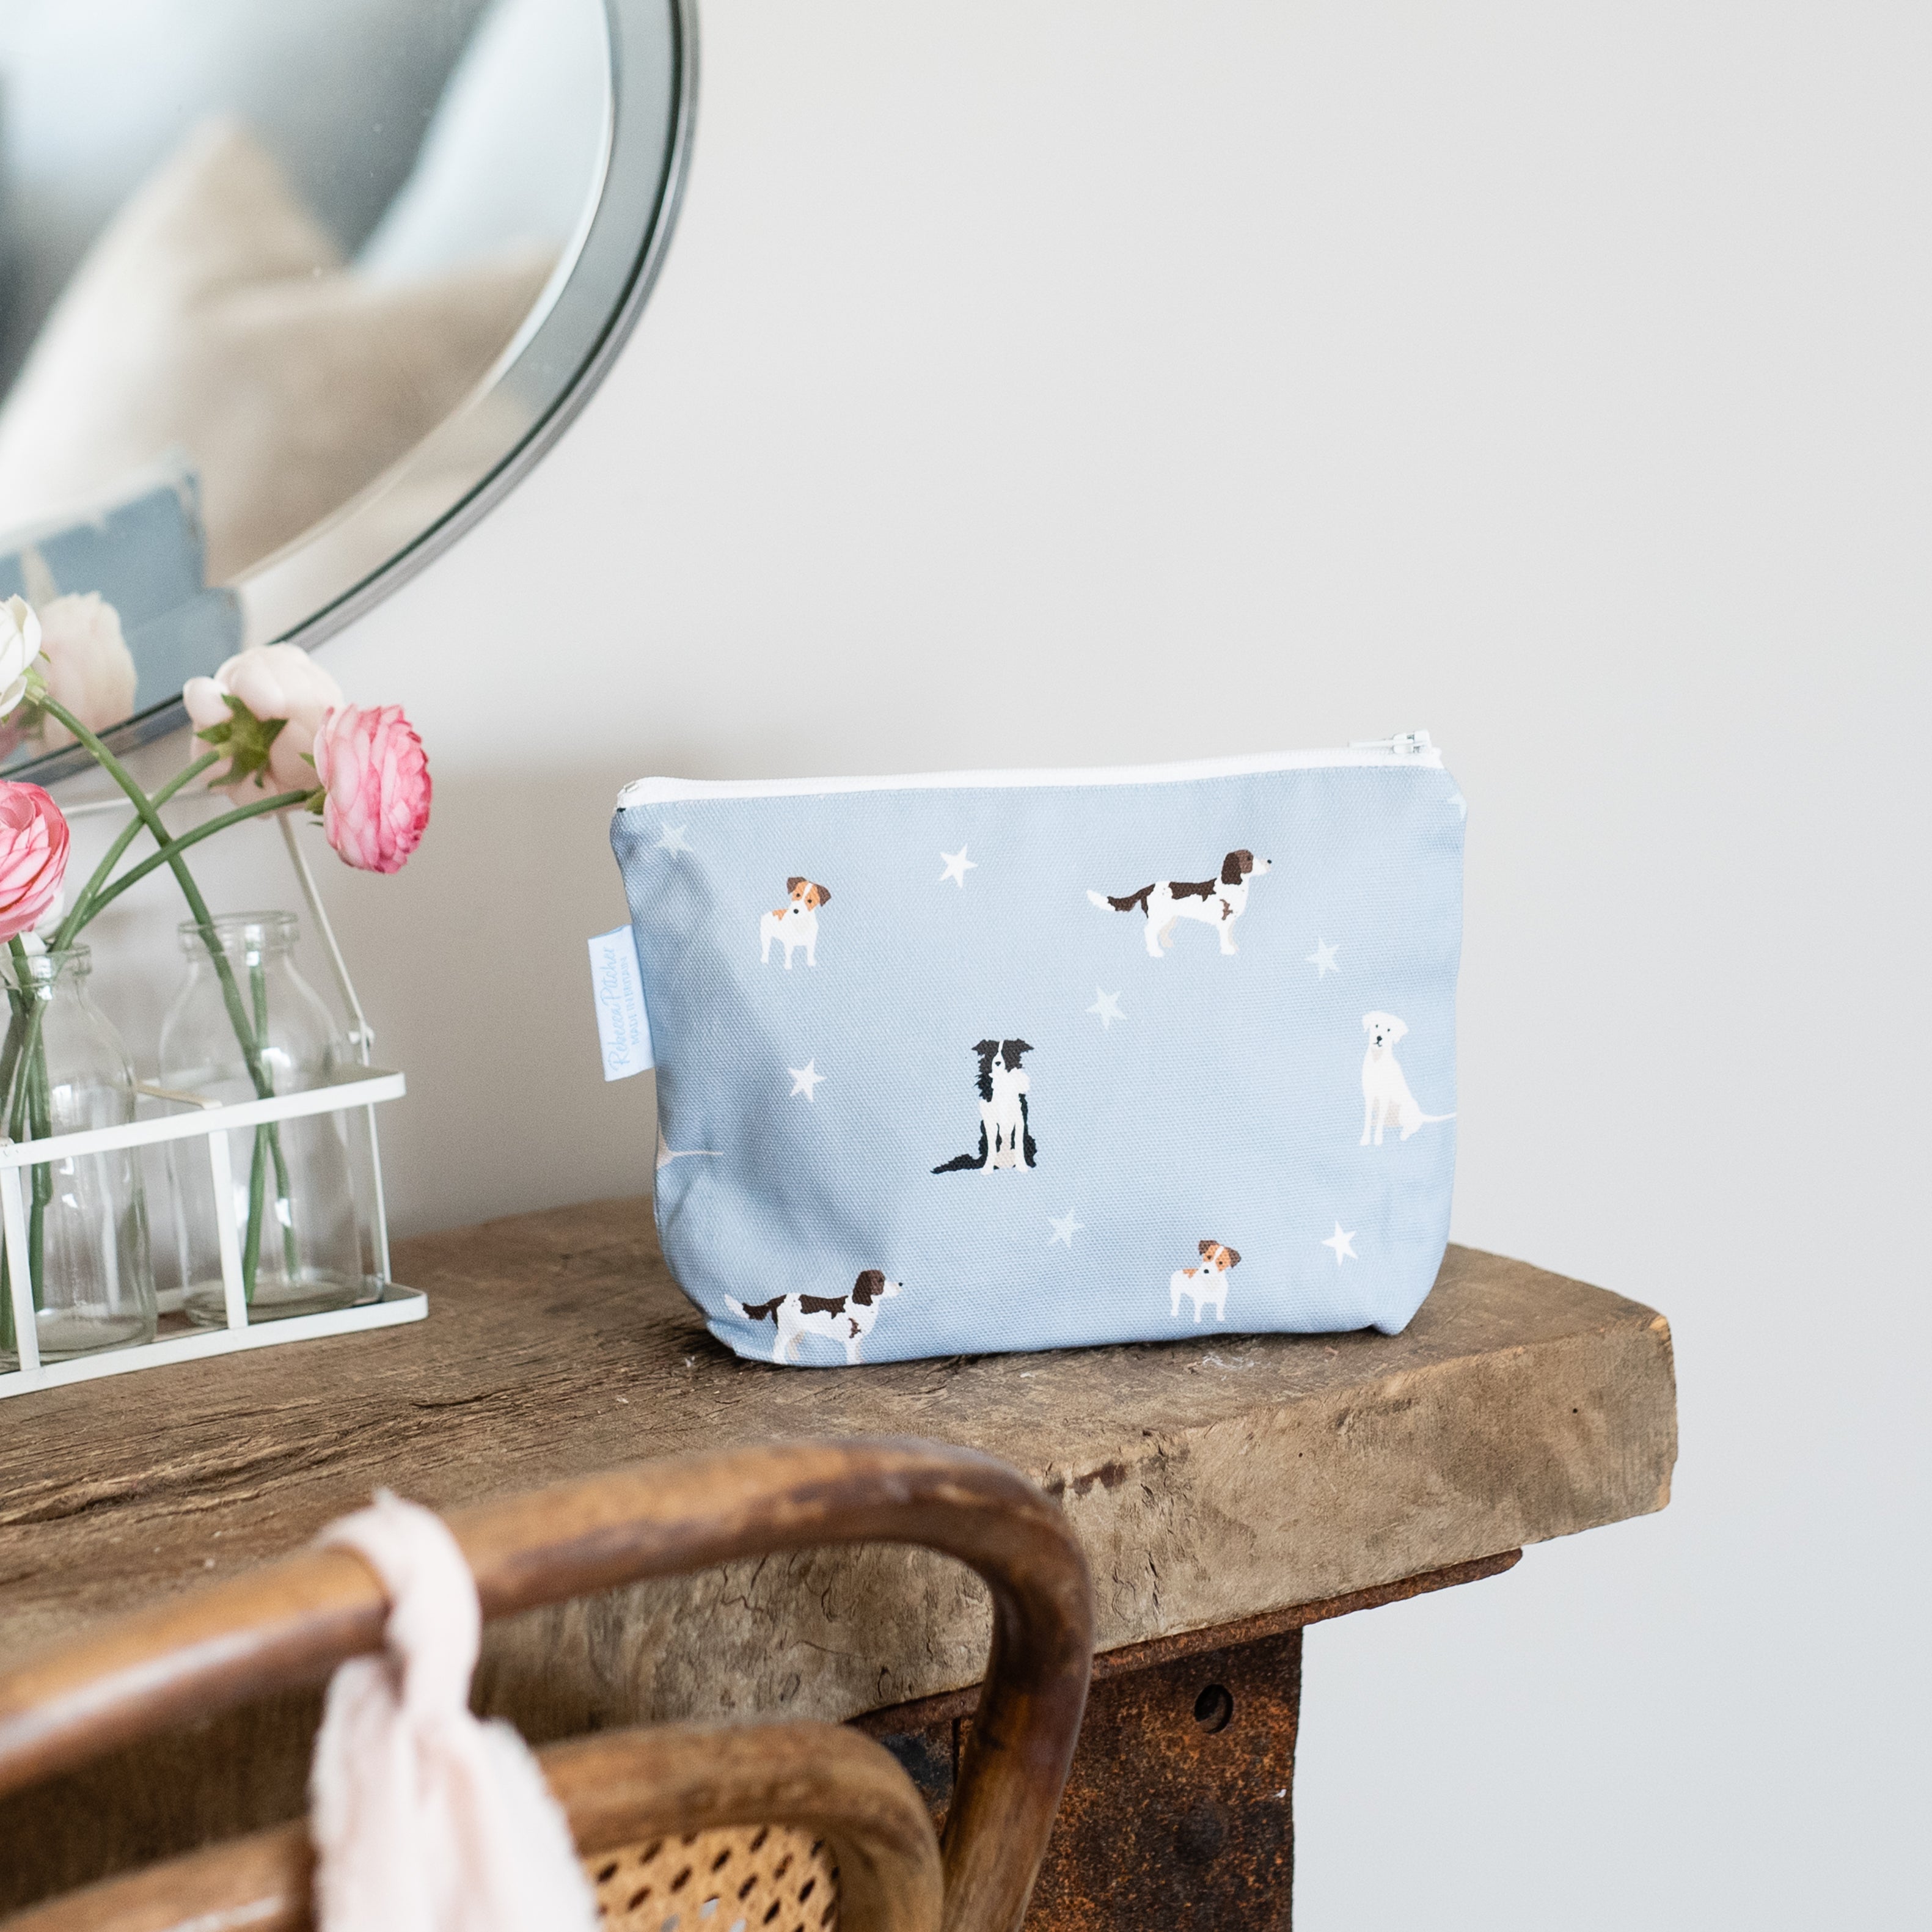 Daisy & Bee Makeup Bag by Rebecca Pitcher